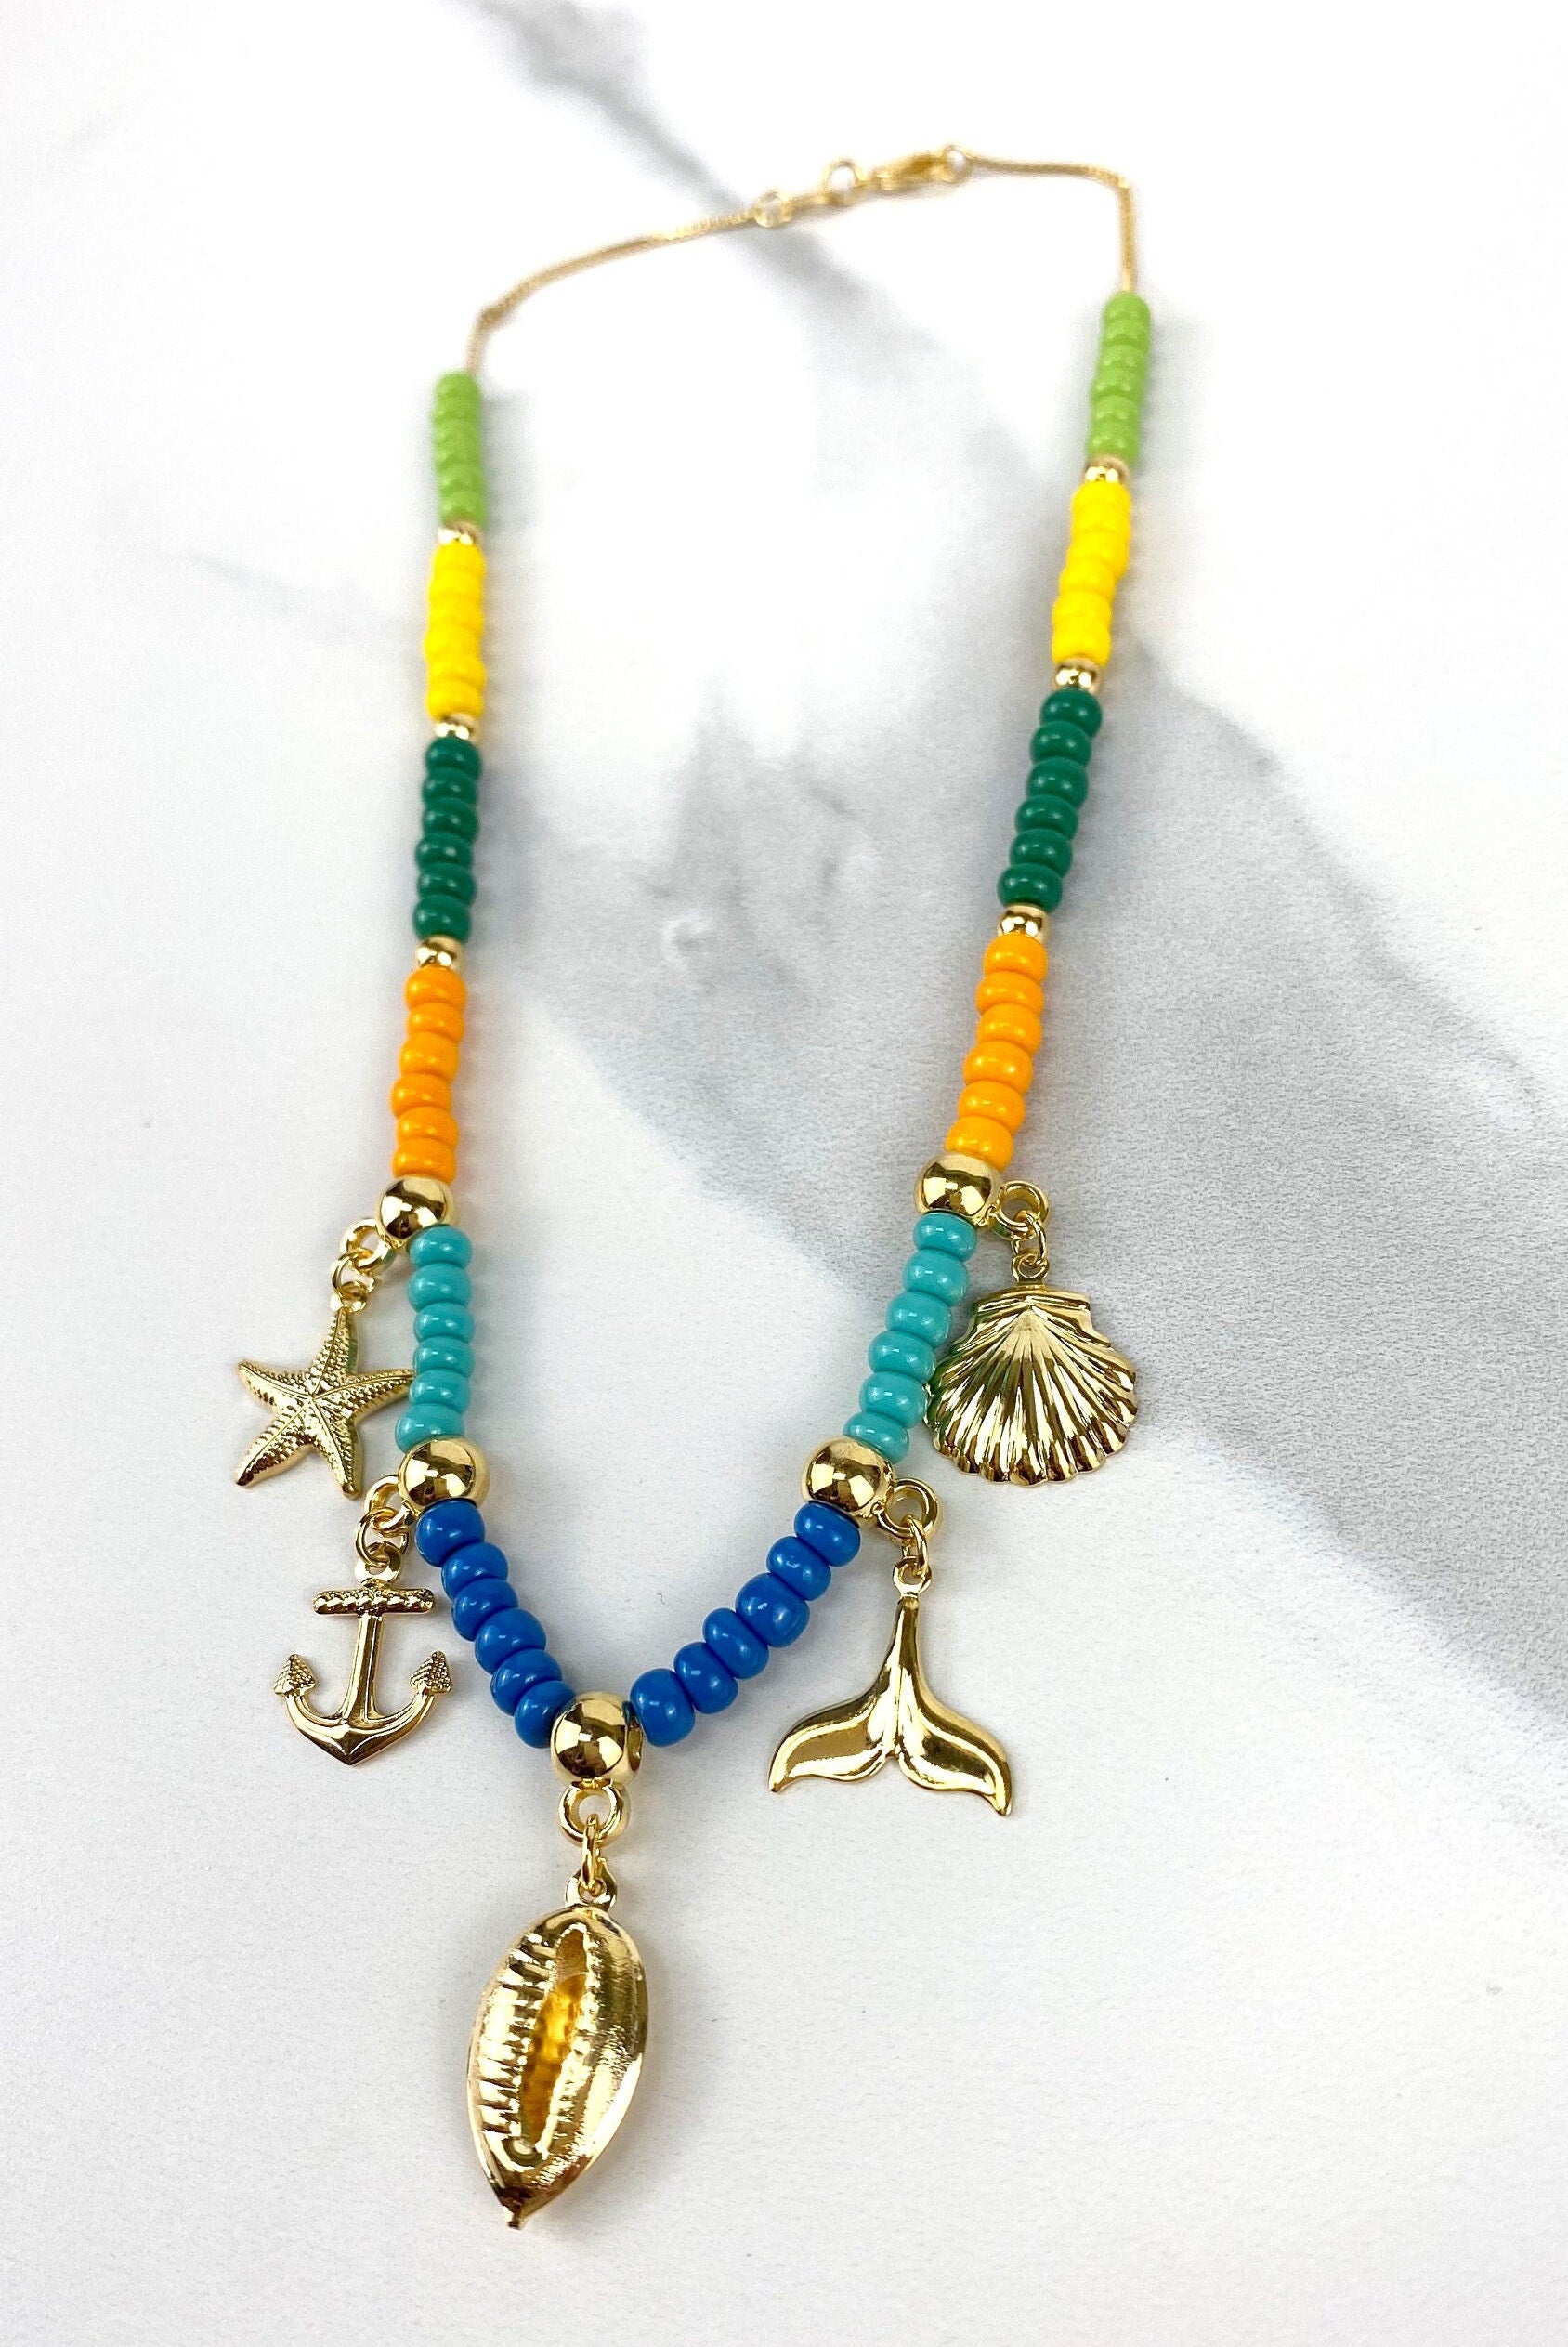 18k Gold Filled Ocean Marine Theme Charms And Colored Beads Necklace - Anchor, Cowry, Shell, Starfish, Whale Tail Wholesale Jewelry Supplies